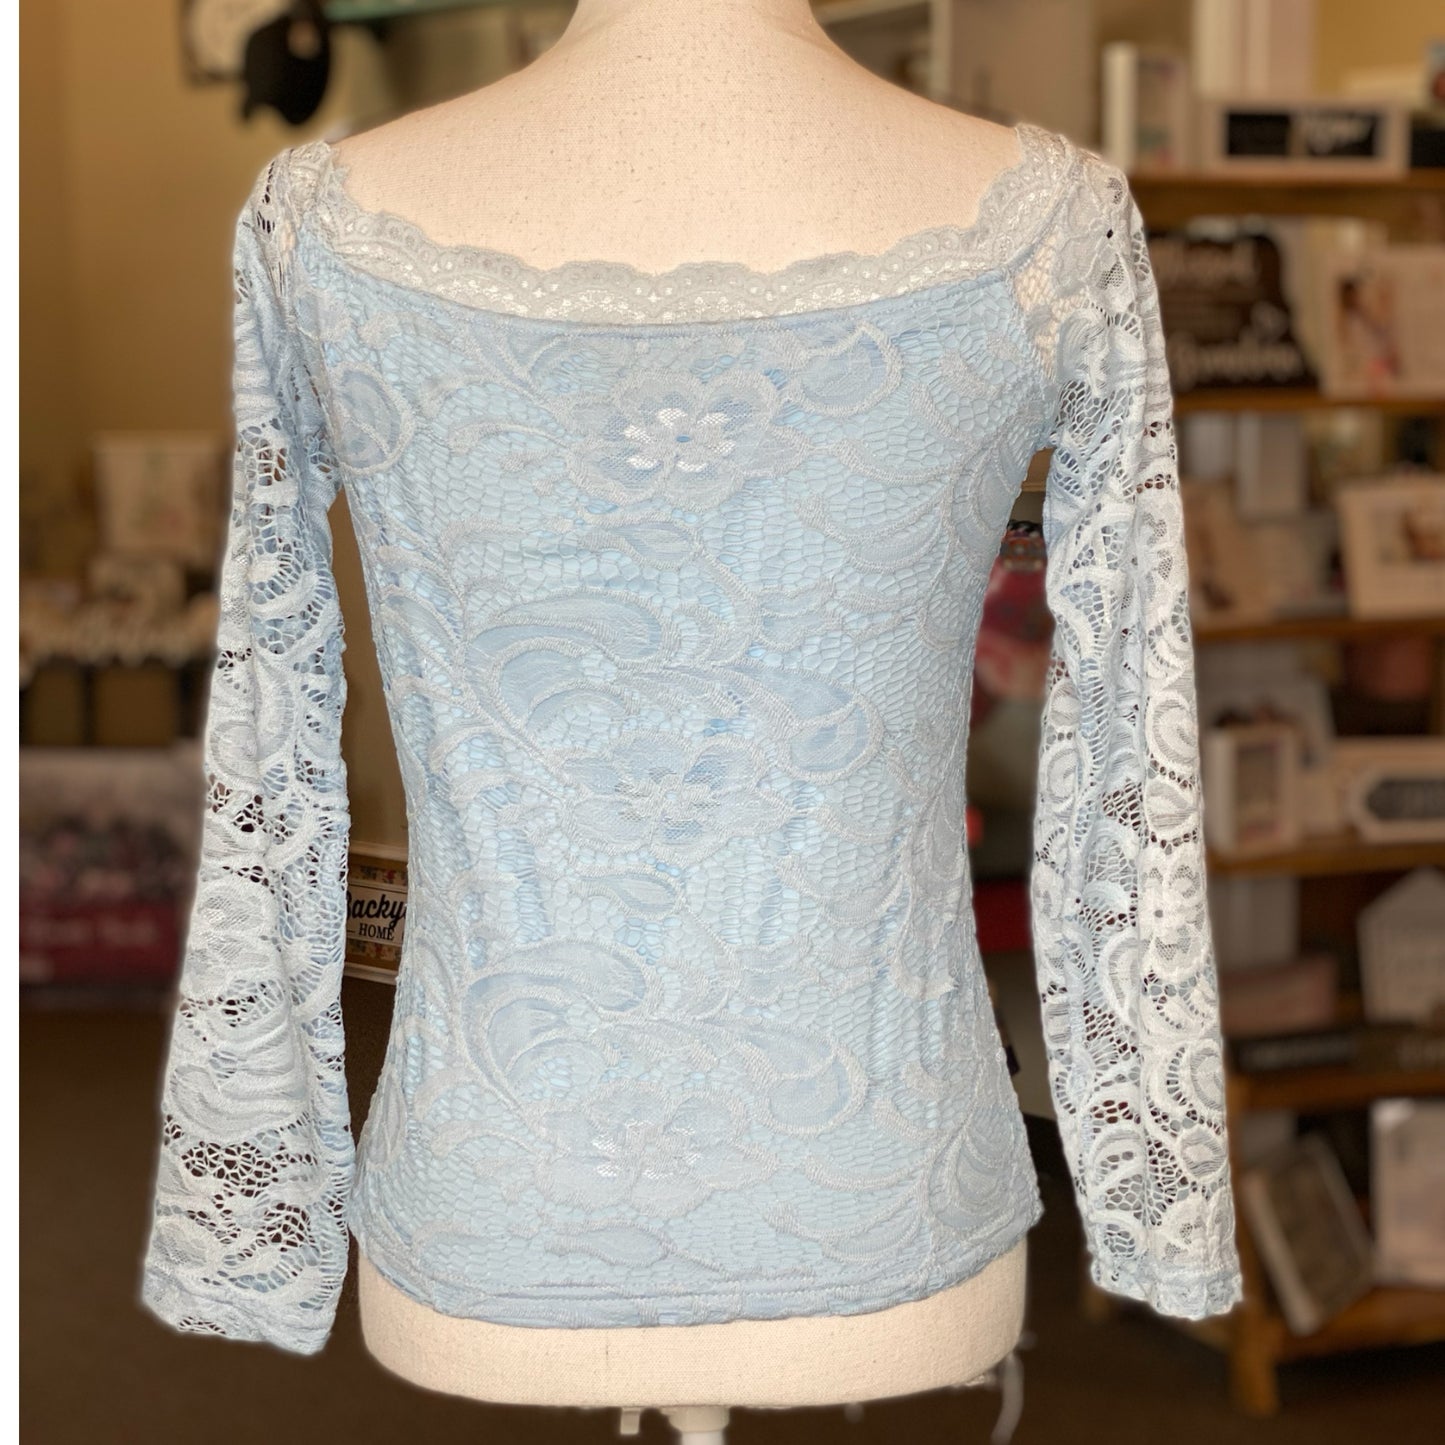 Chicme Lace Top - Size Large